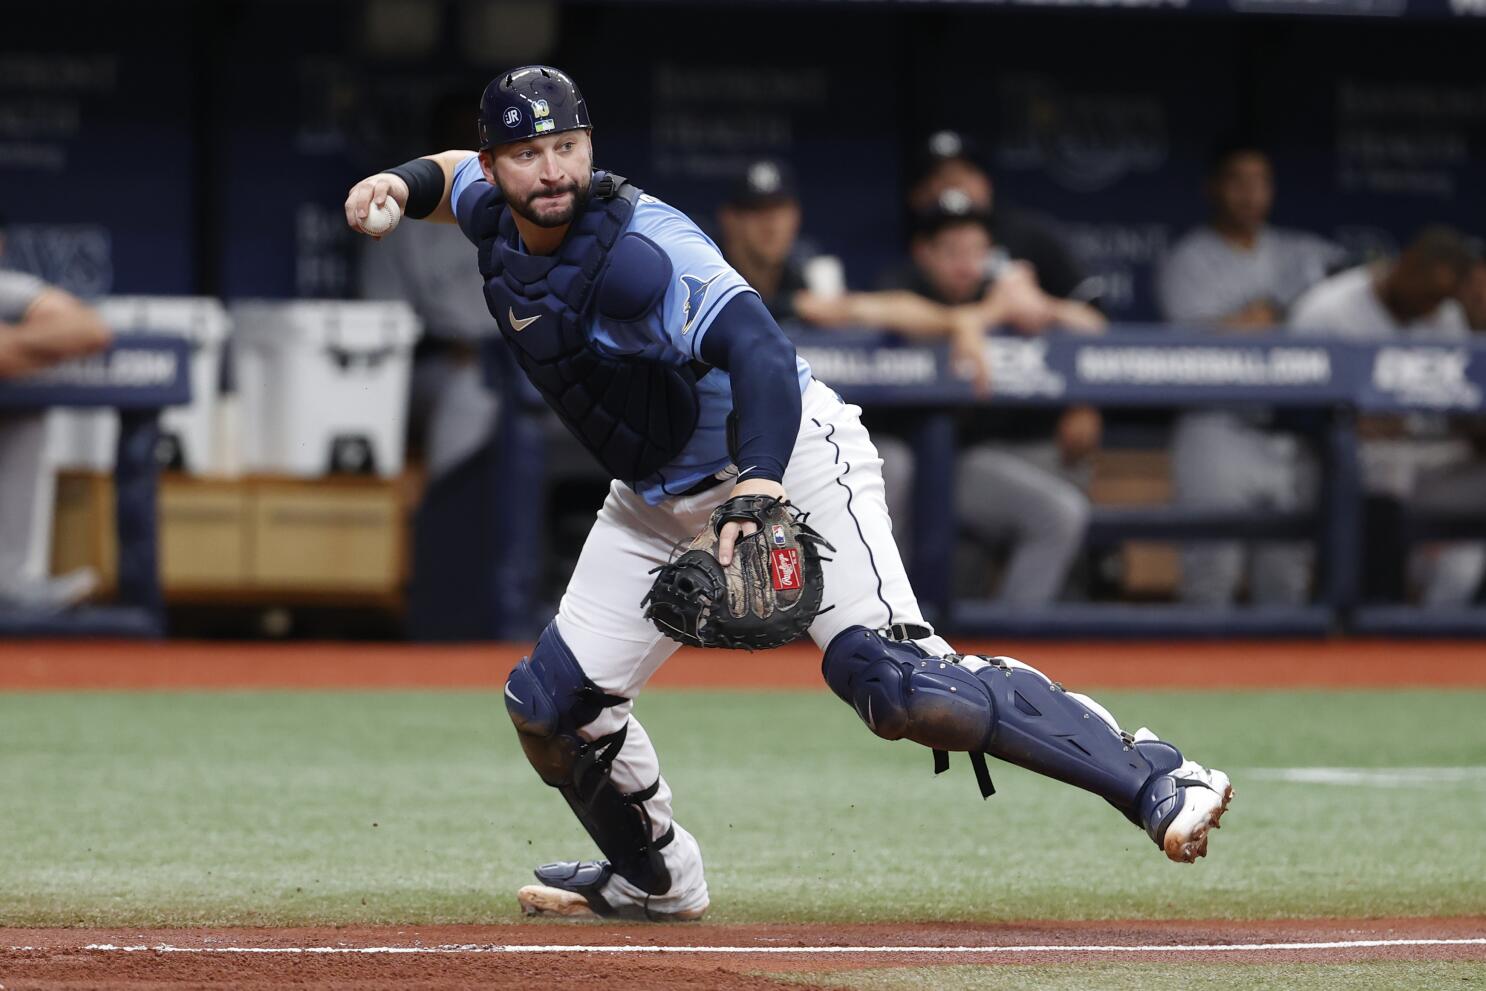 AL champion Rays sign free agent catcher Mike Zunino to 1-year